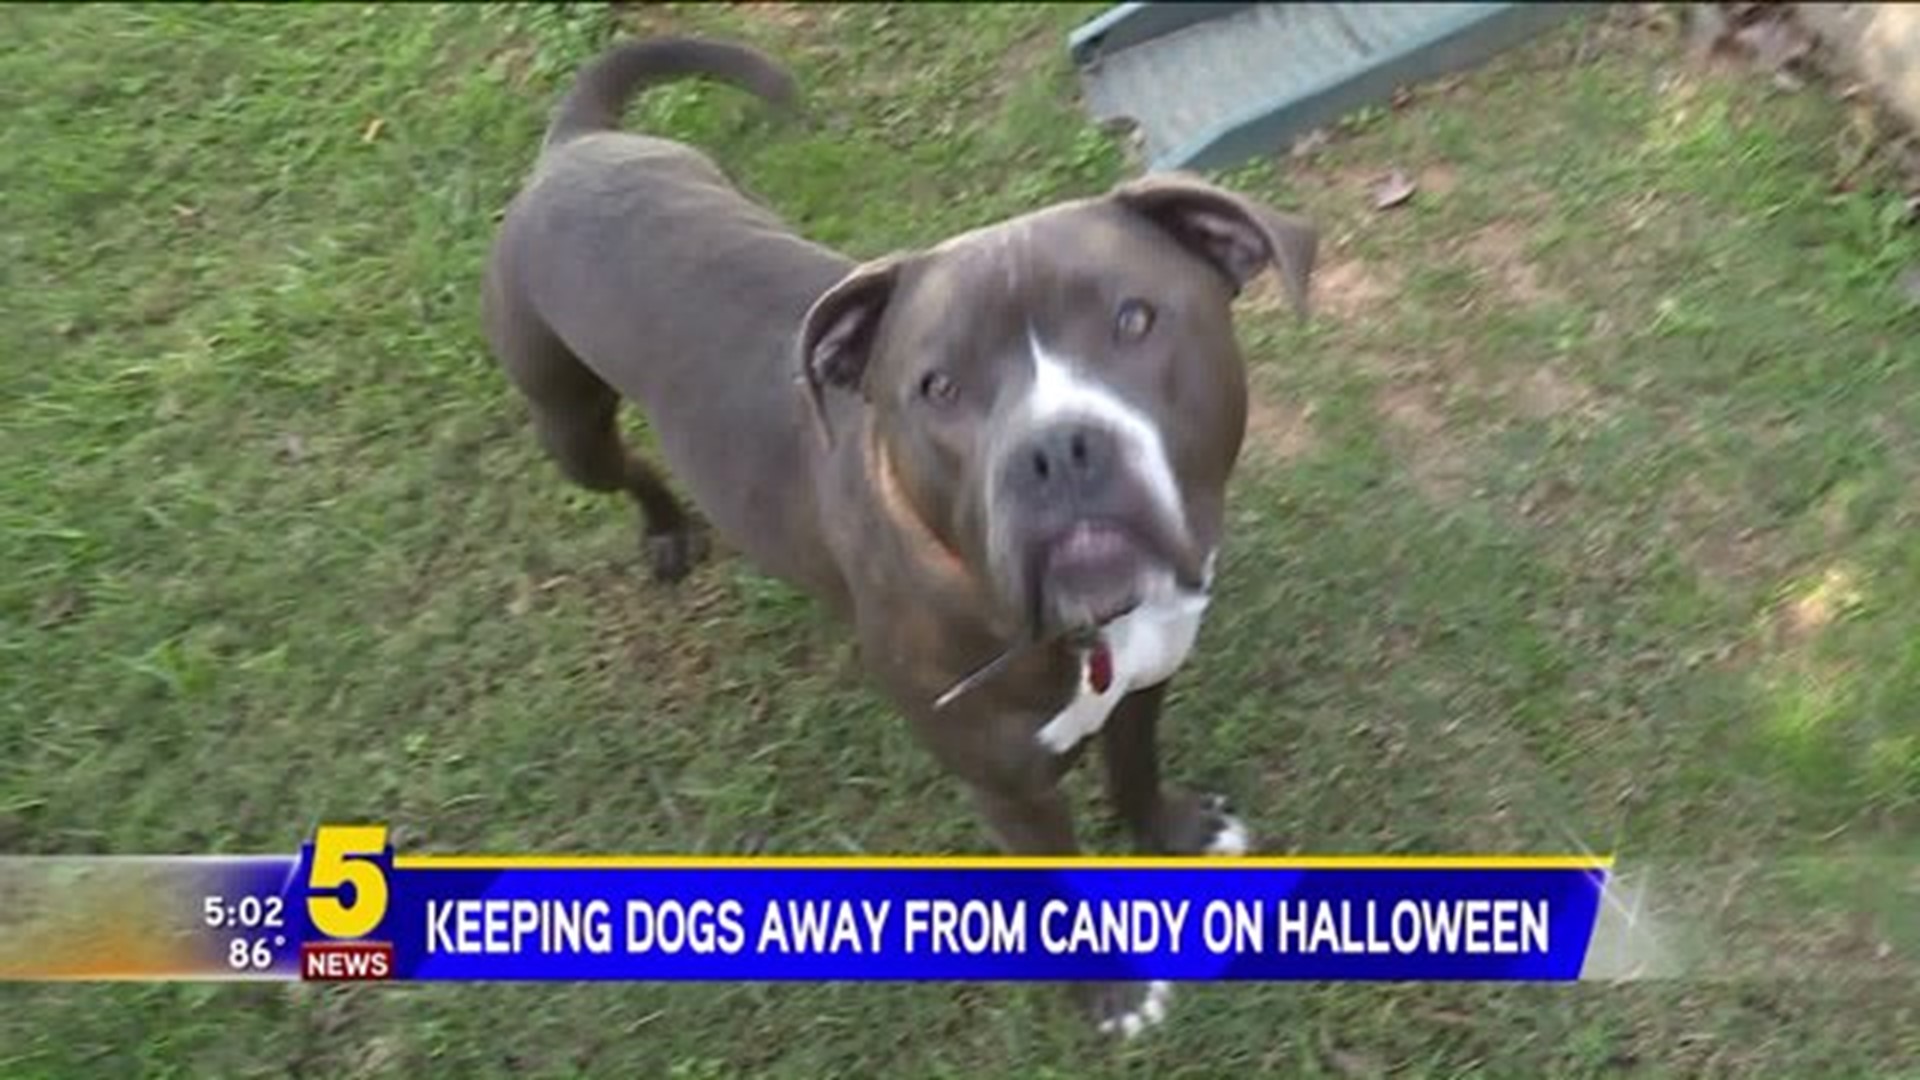 KEEP CANDY AWAY FROM DOGS